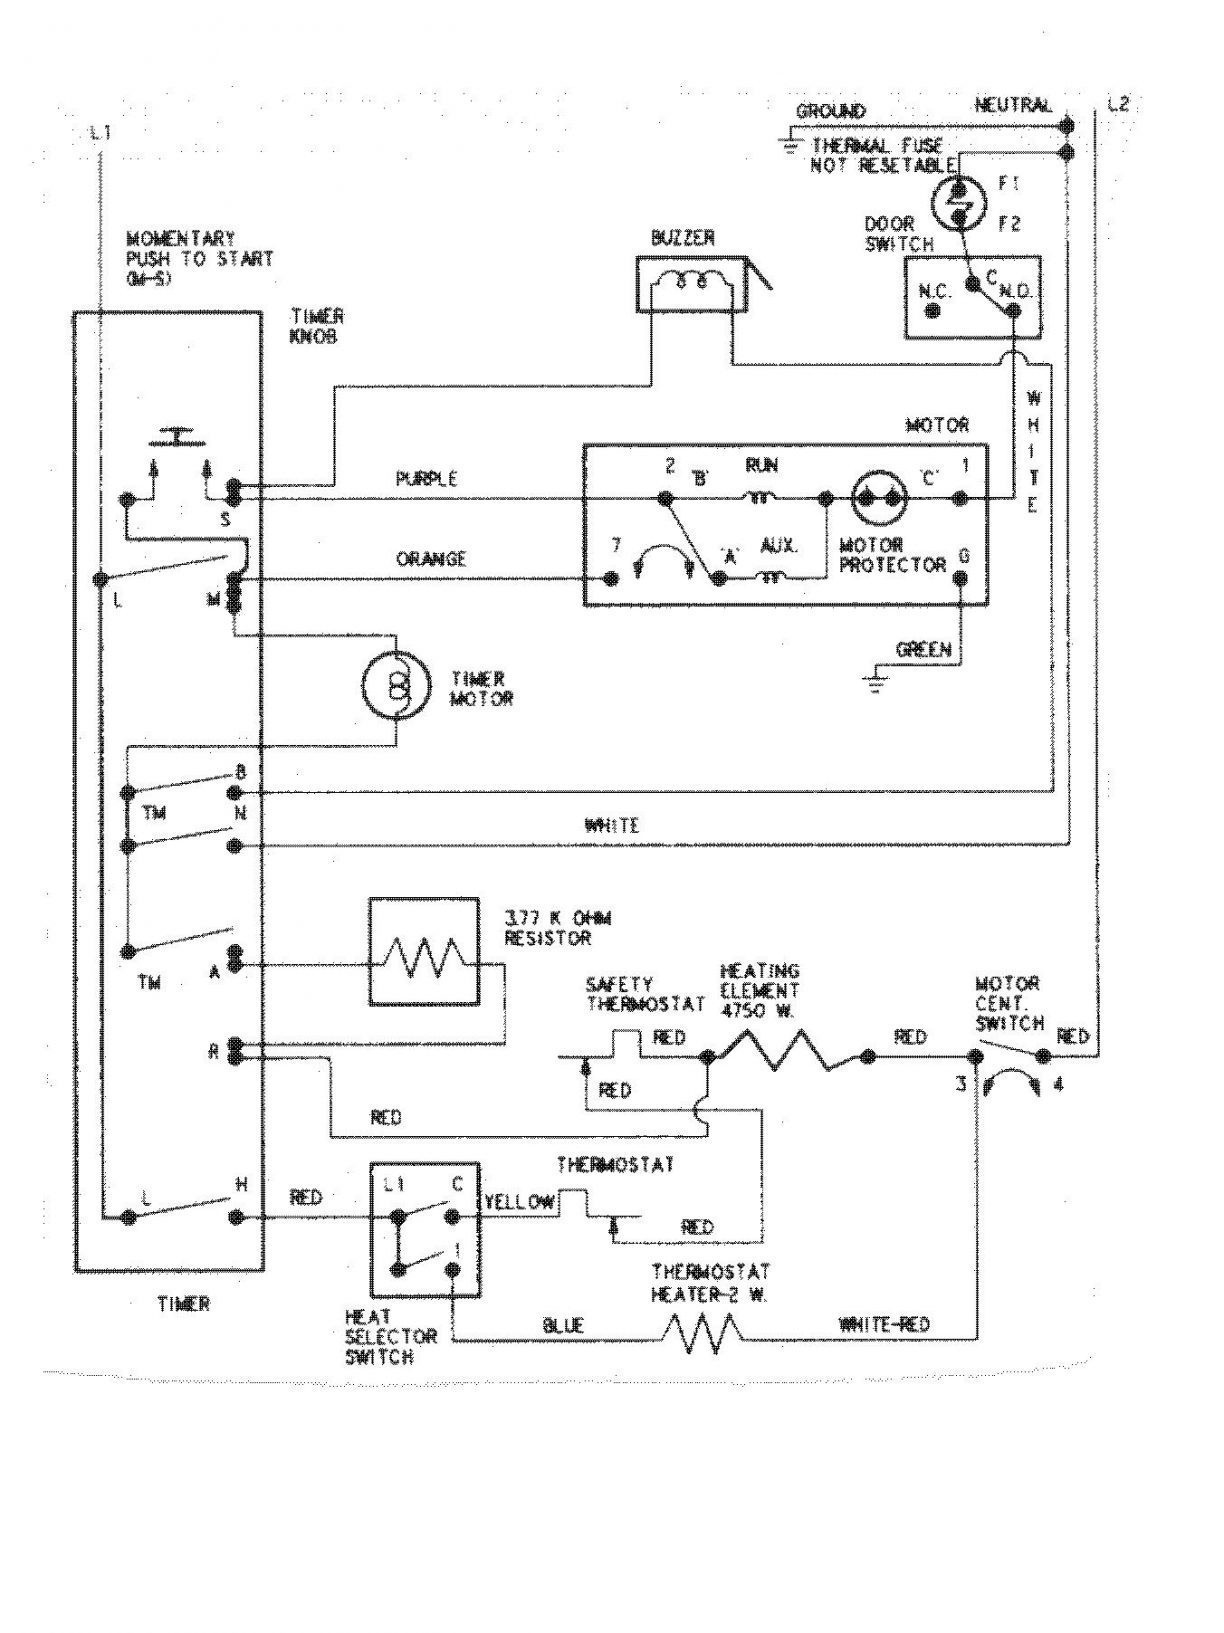 Whirlpool Electric Dryer Wiring Diagram Unique Stunning Whirlpool Dryer Schematic Wiring Diagram Contemporary